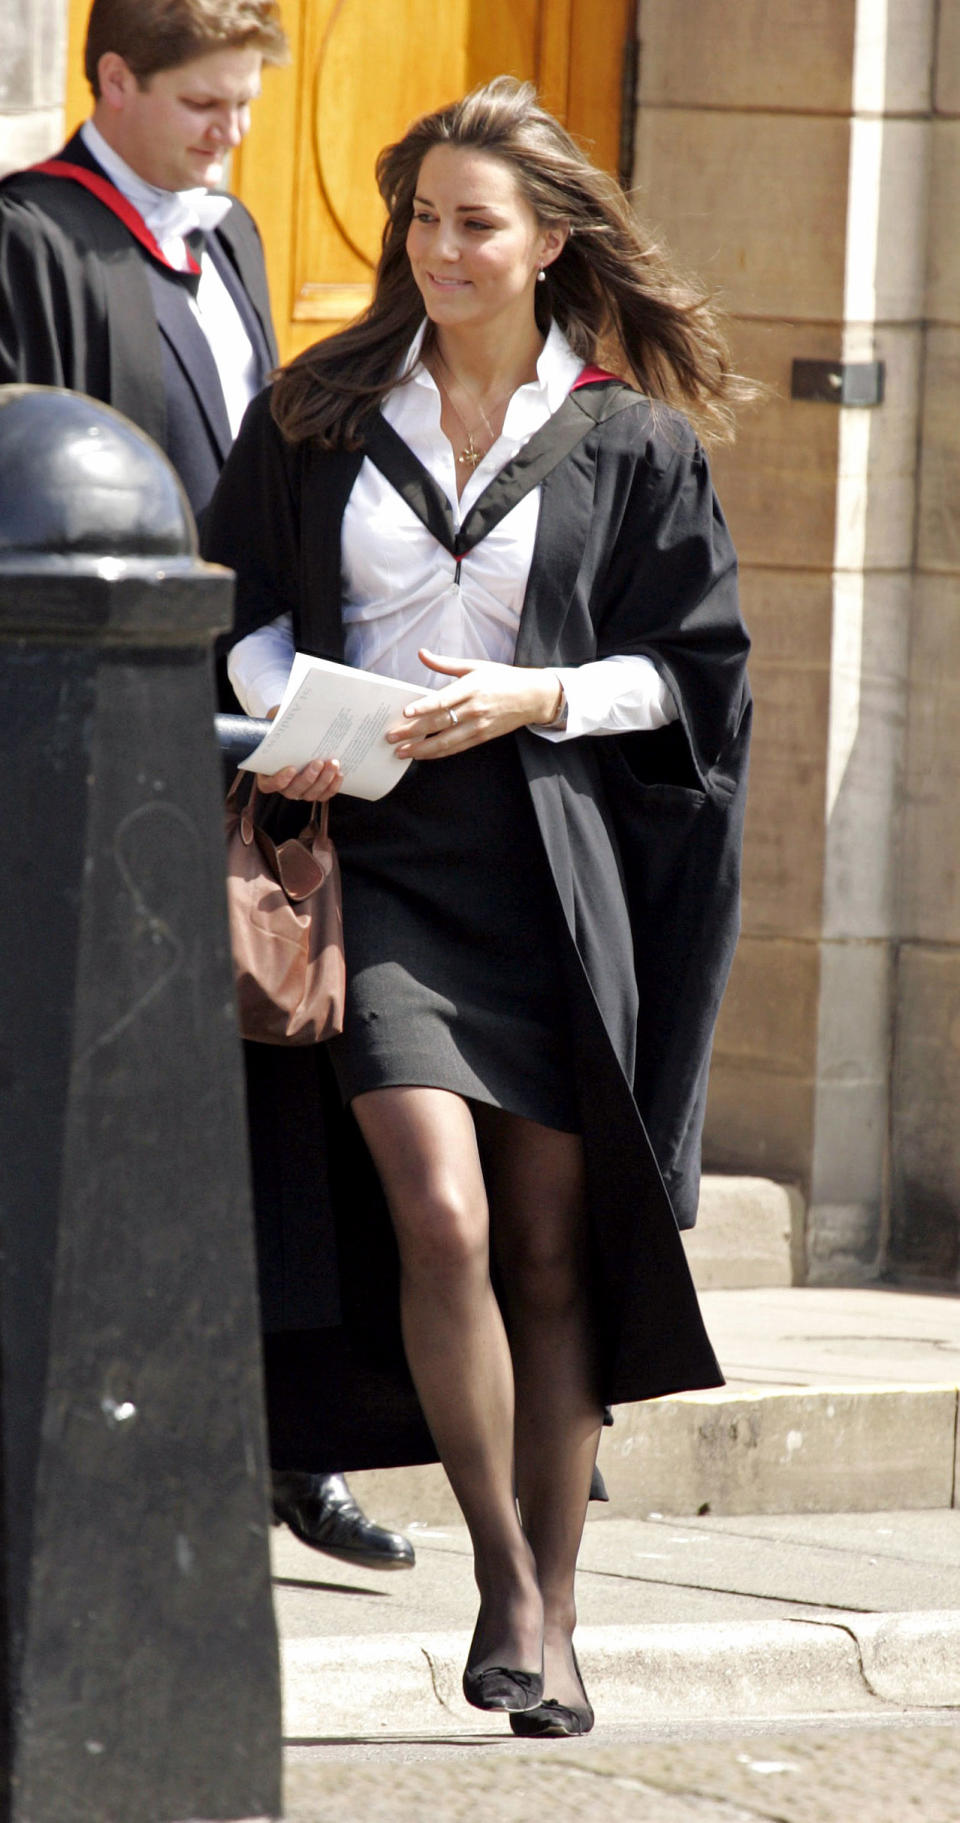 Kate Middleton Graduation Ceremony At The University Of St Andrews In Scotland. . (Photo by Mark Cuthbert/UK Press via Getty Images)